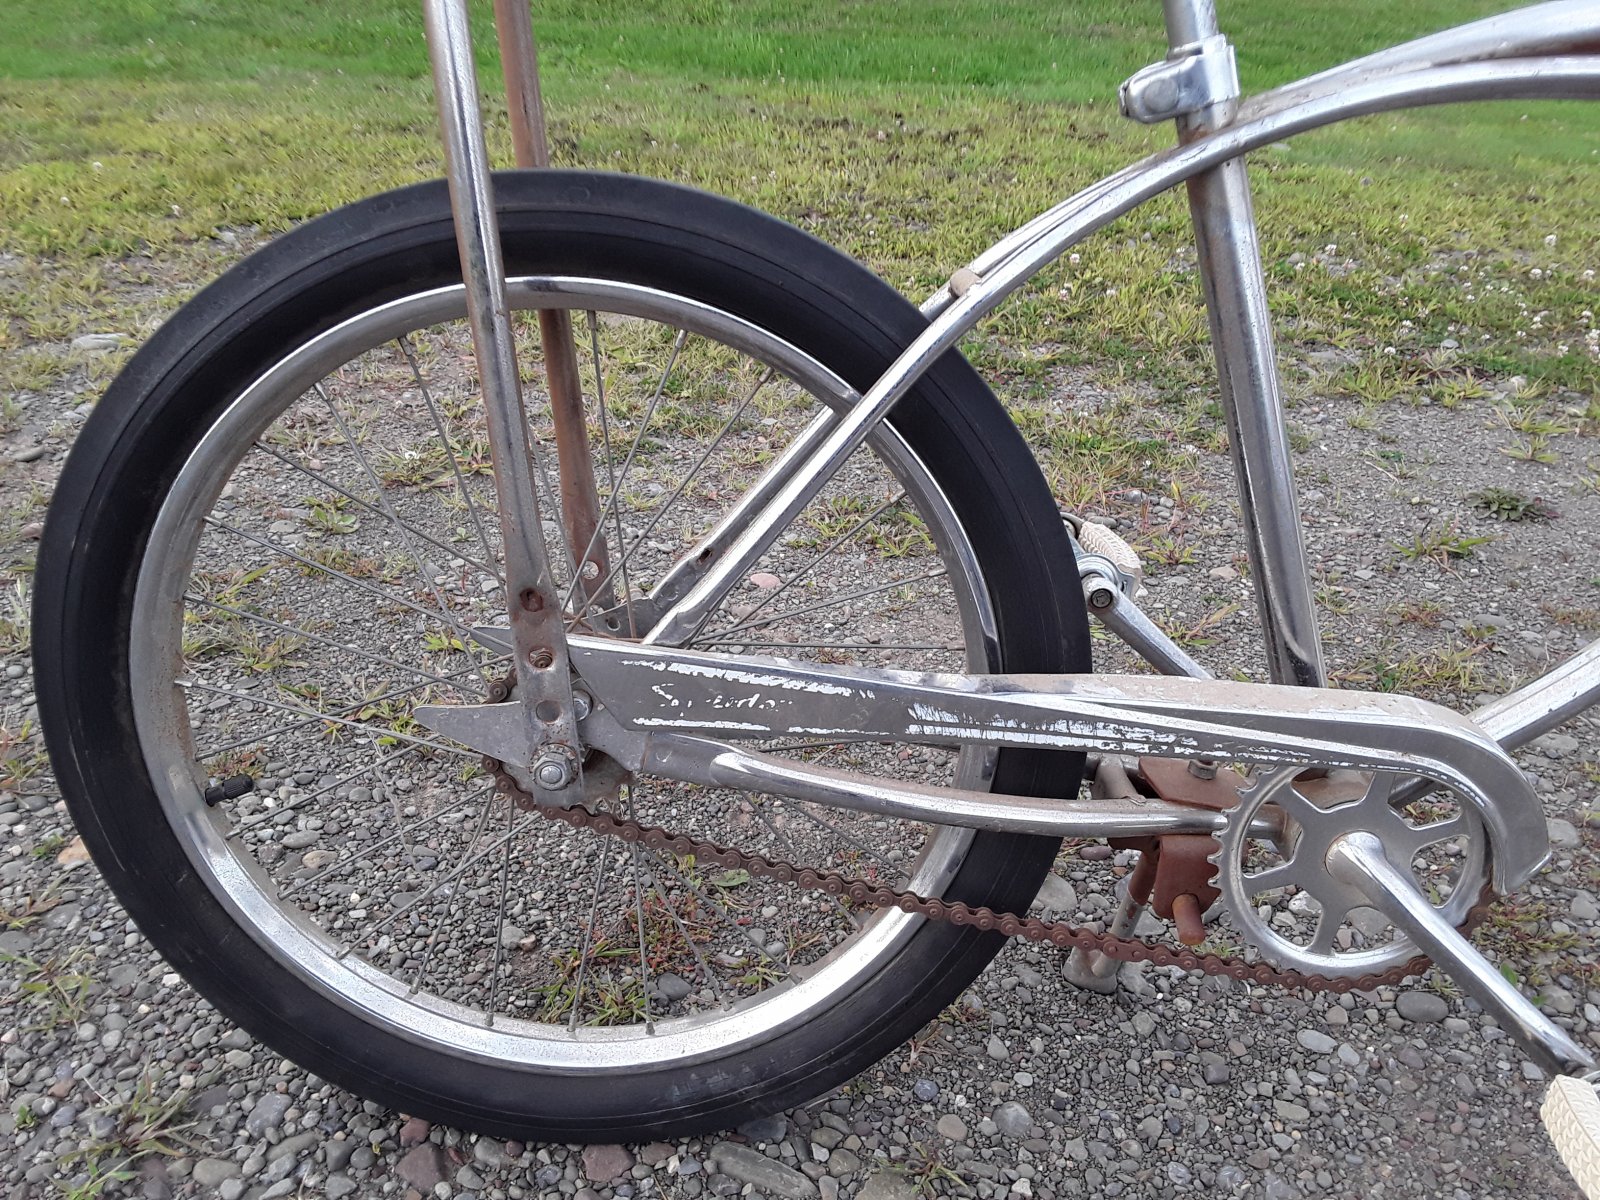 sears spyder bicycle